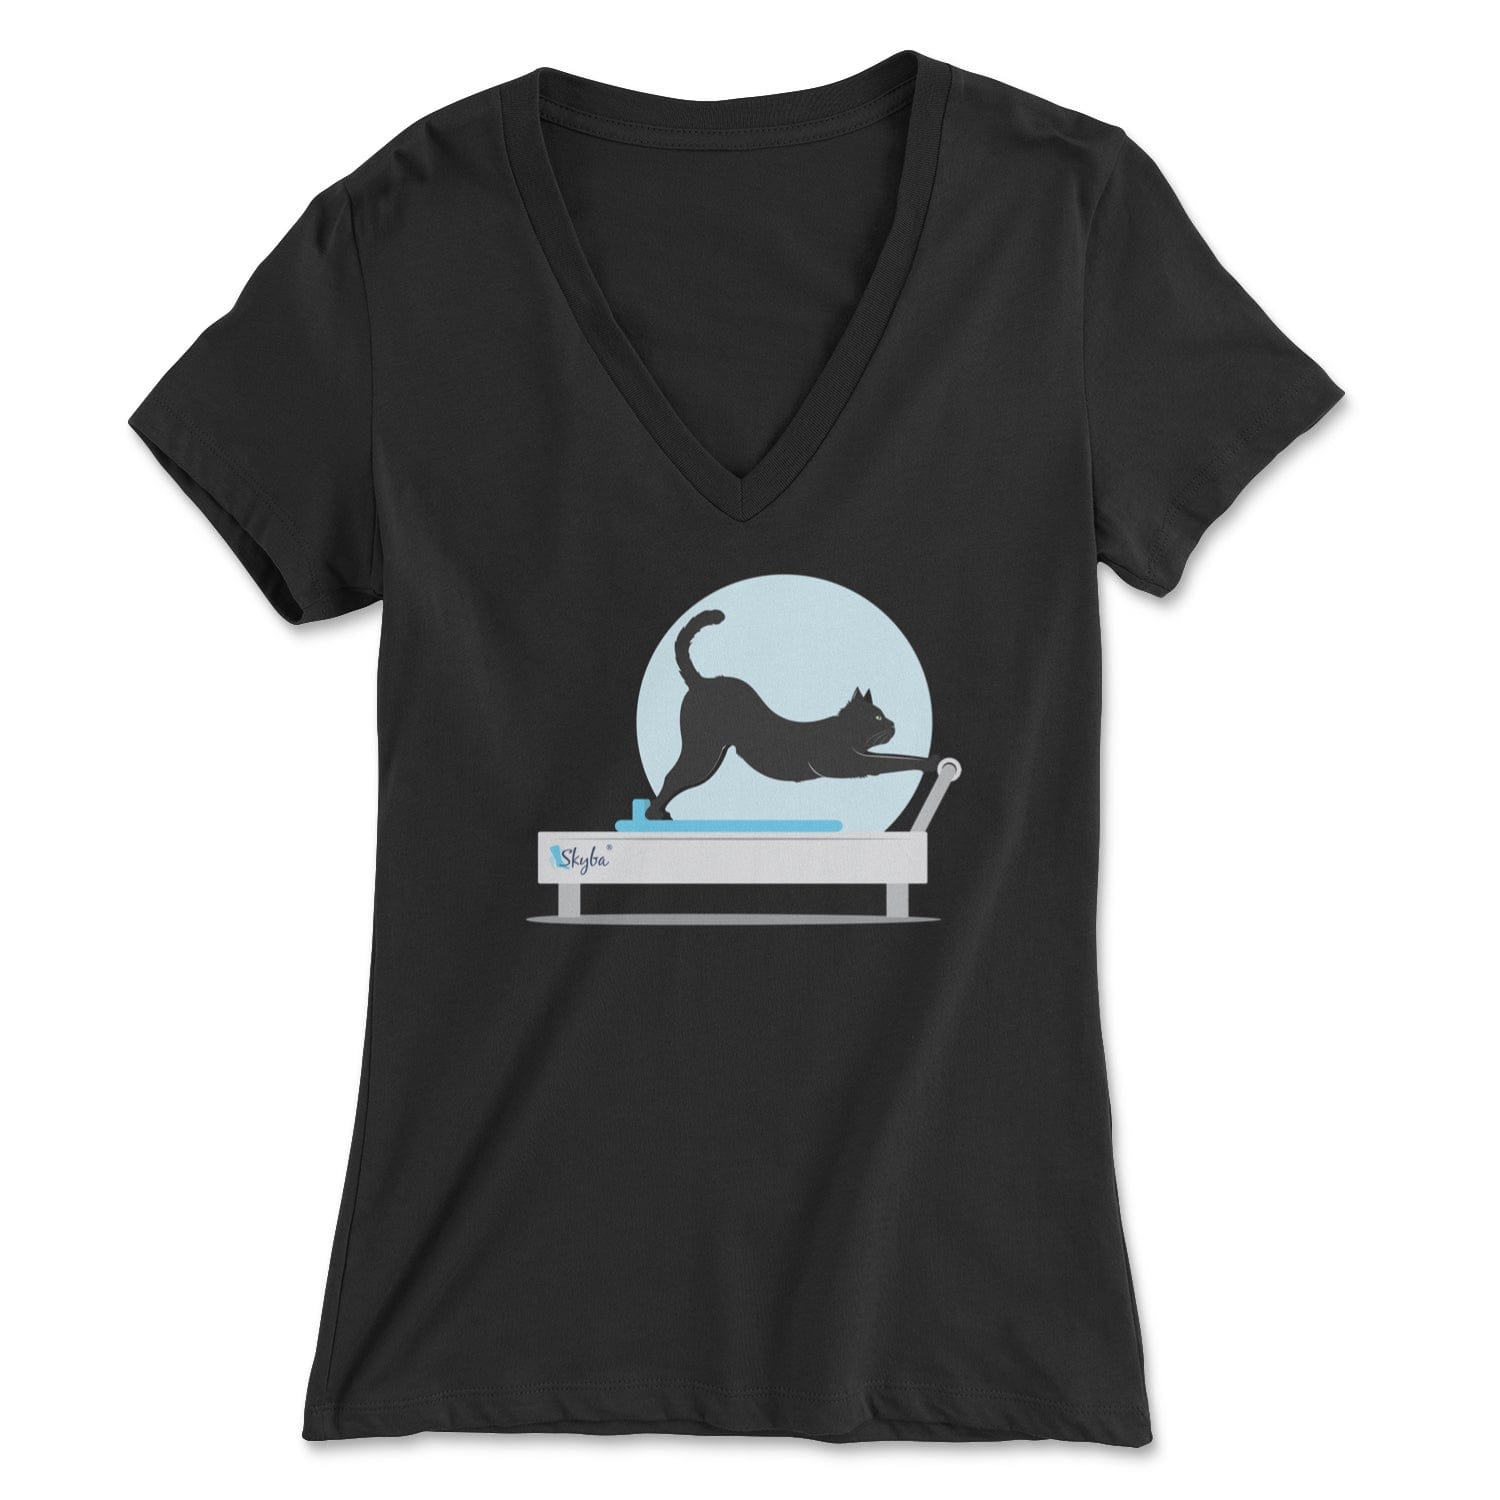 Stretching Cat on the Reformer - Women's V-Neck Tee Skyba Print Material